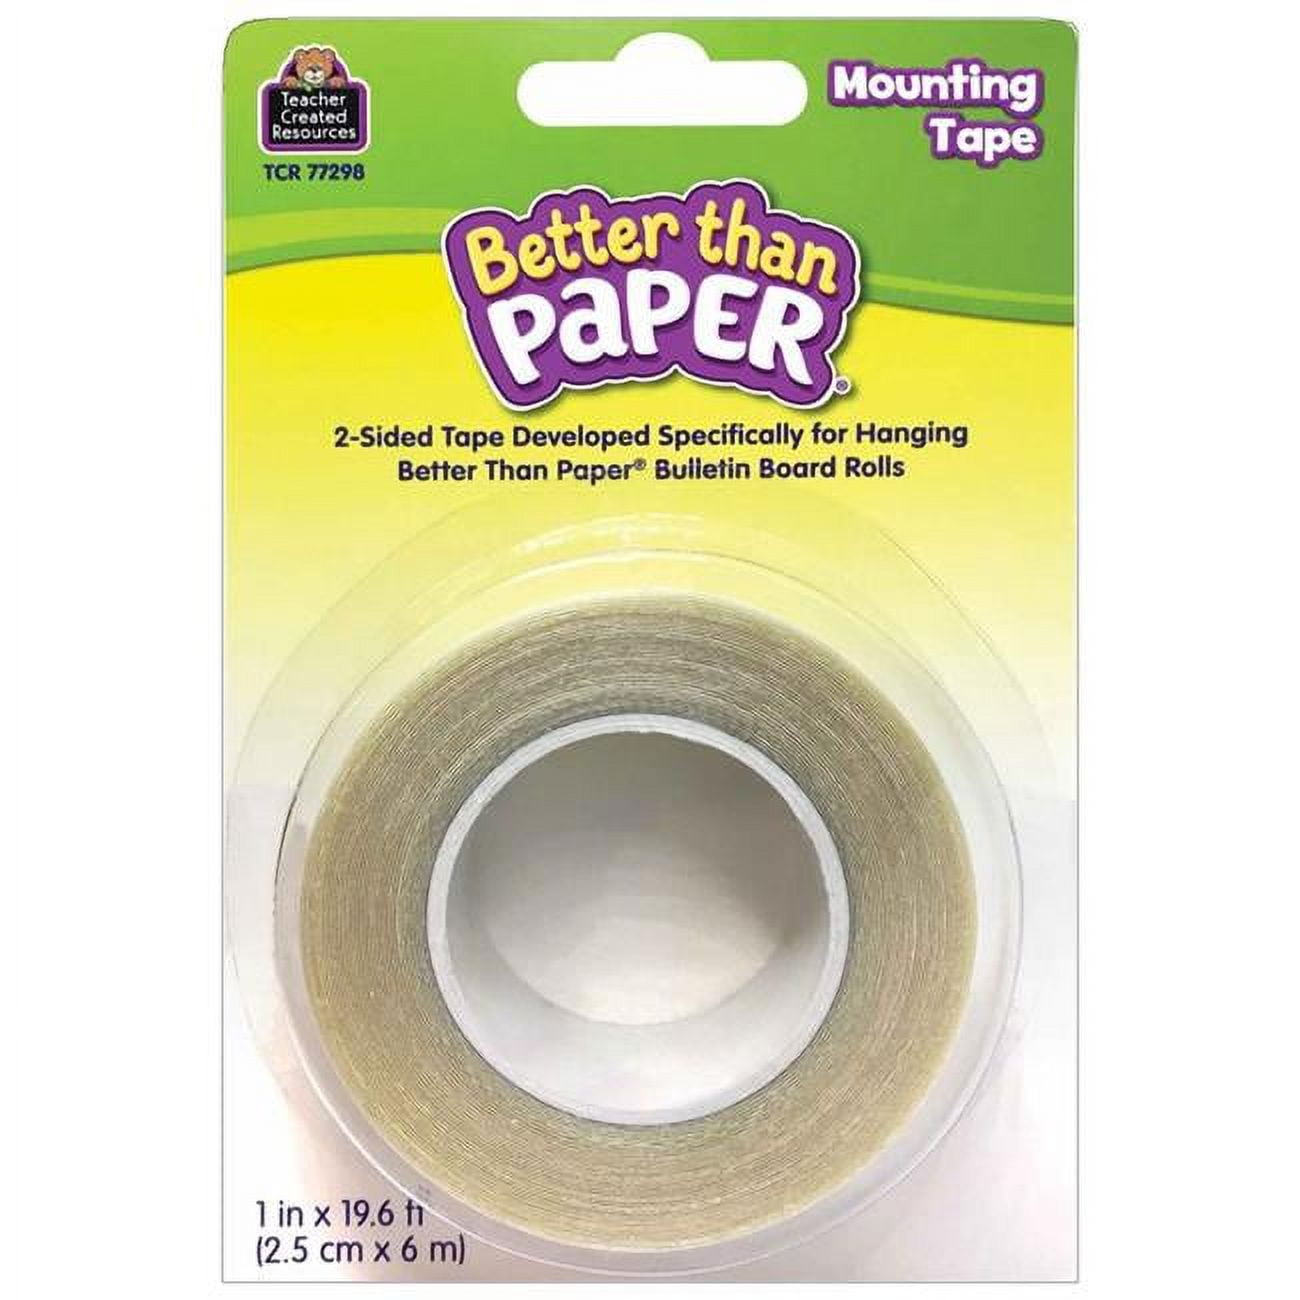 Teacher Created Resources Better Than Paper Mounting Tape 1 x 19.6' 3  Rolls (TCR77298-3) 